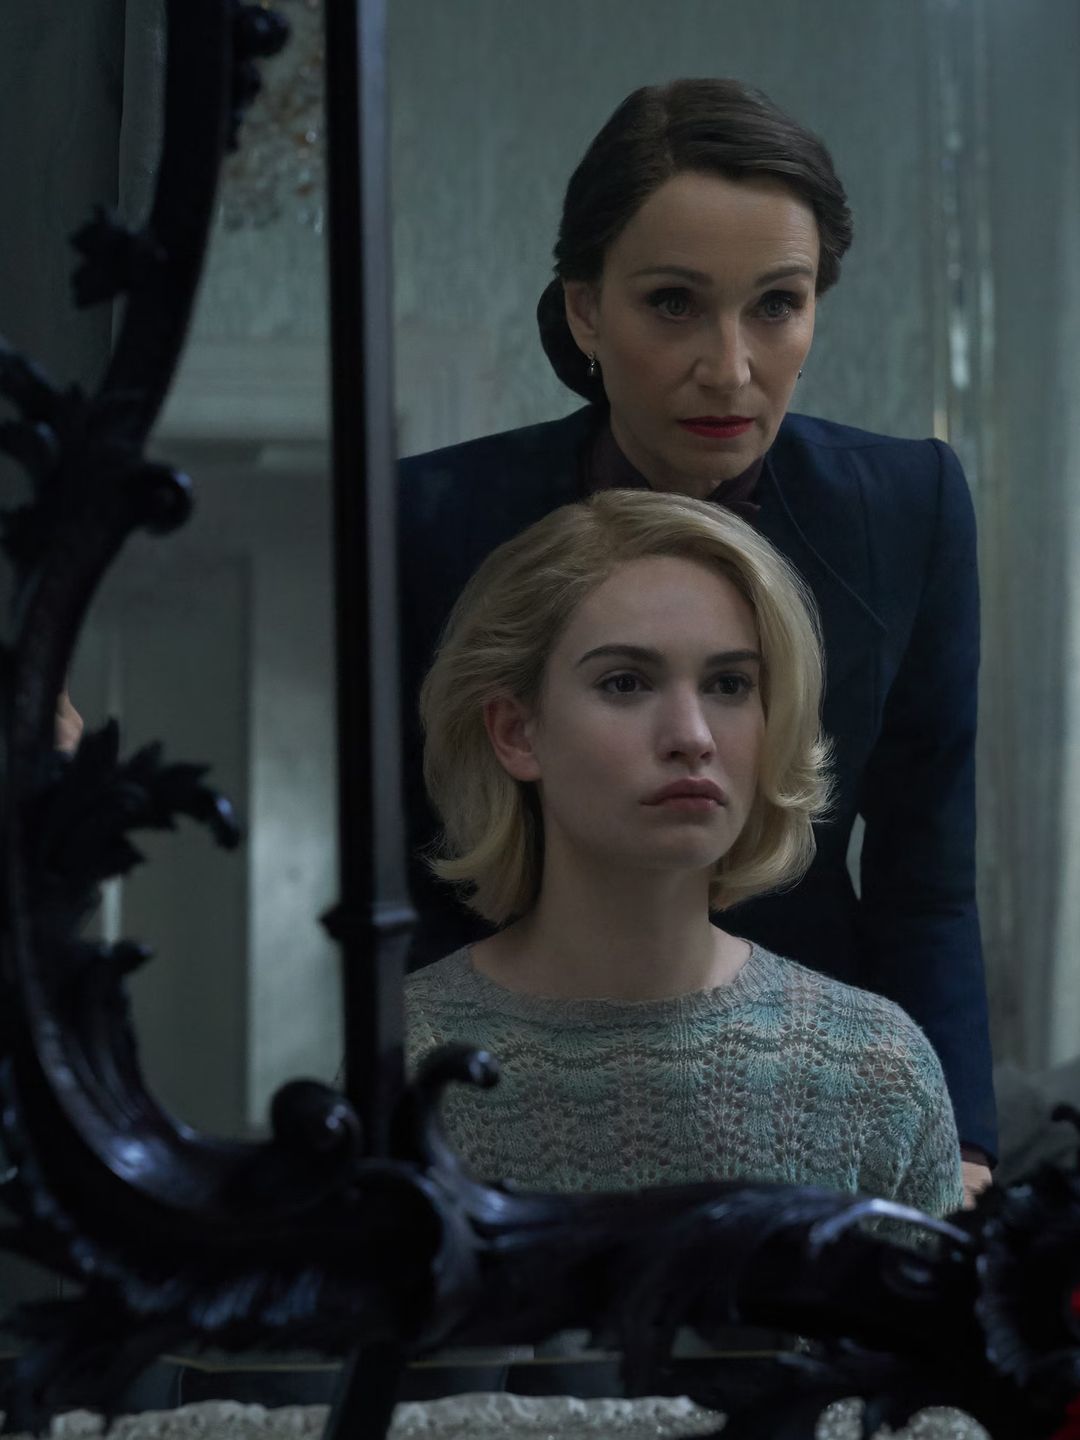 Kristin Scott Thomas and Lily James previously worked together in the 2020 adaptation of Rebecca